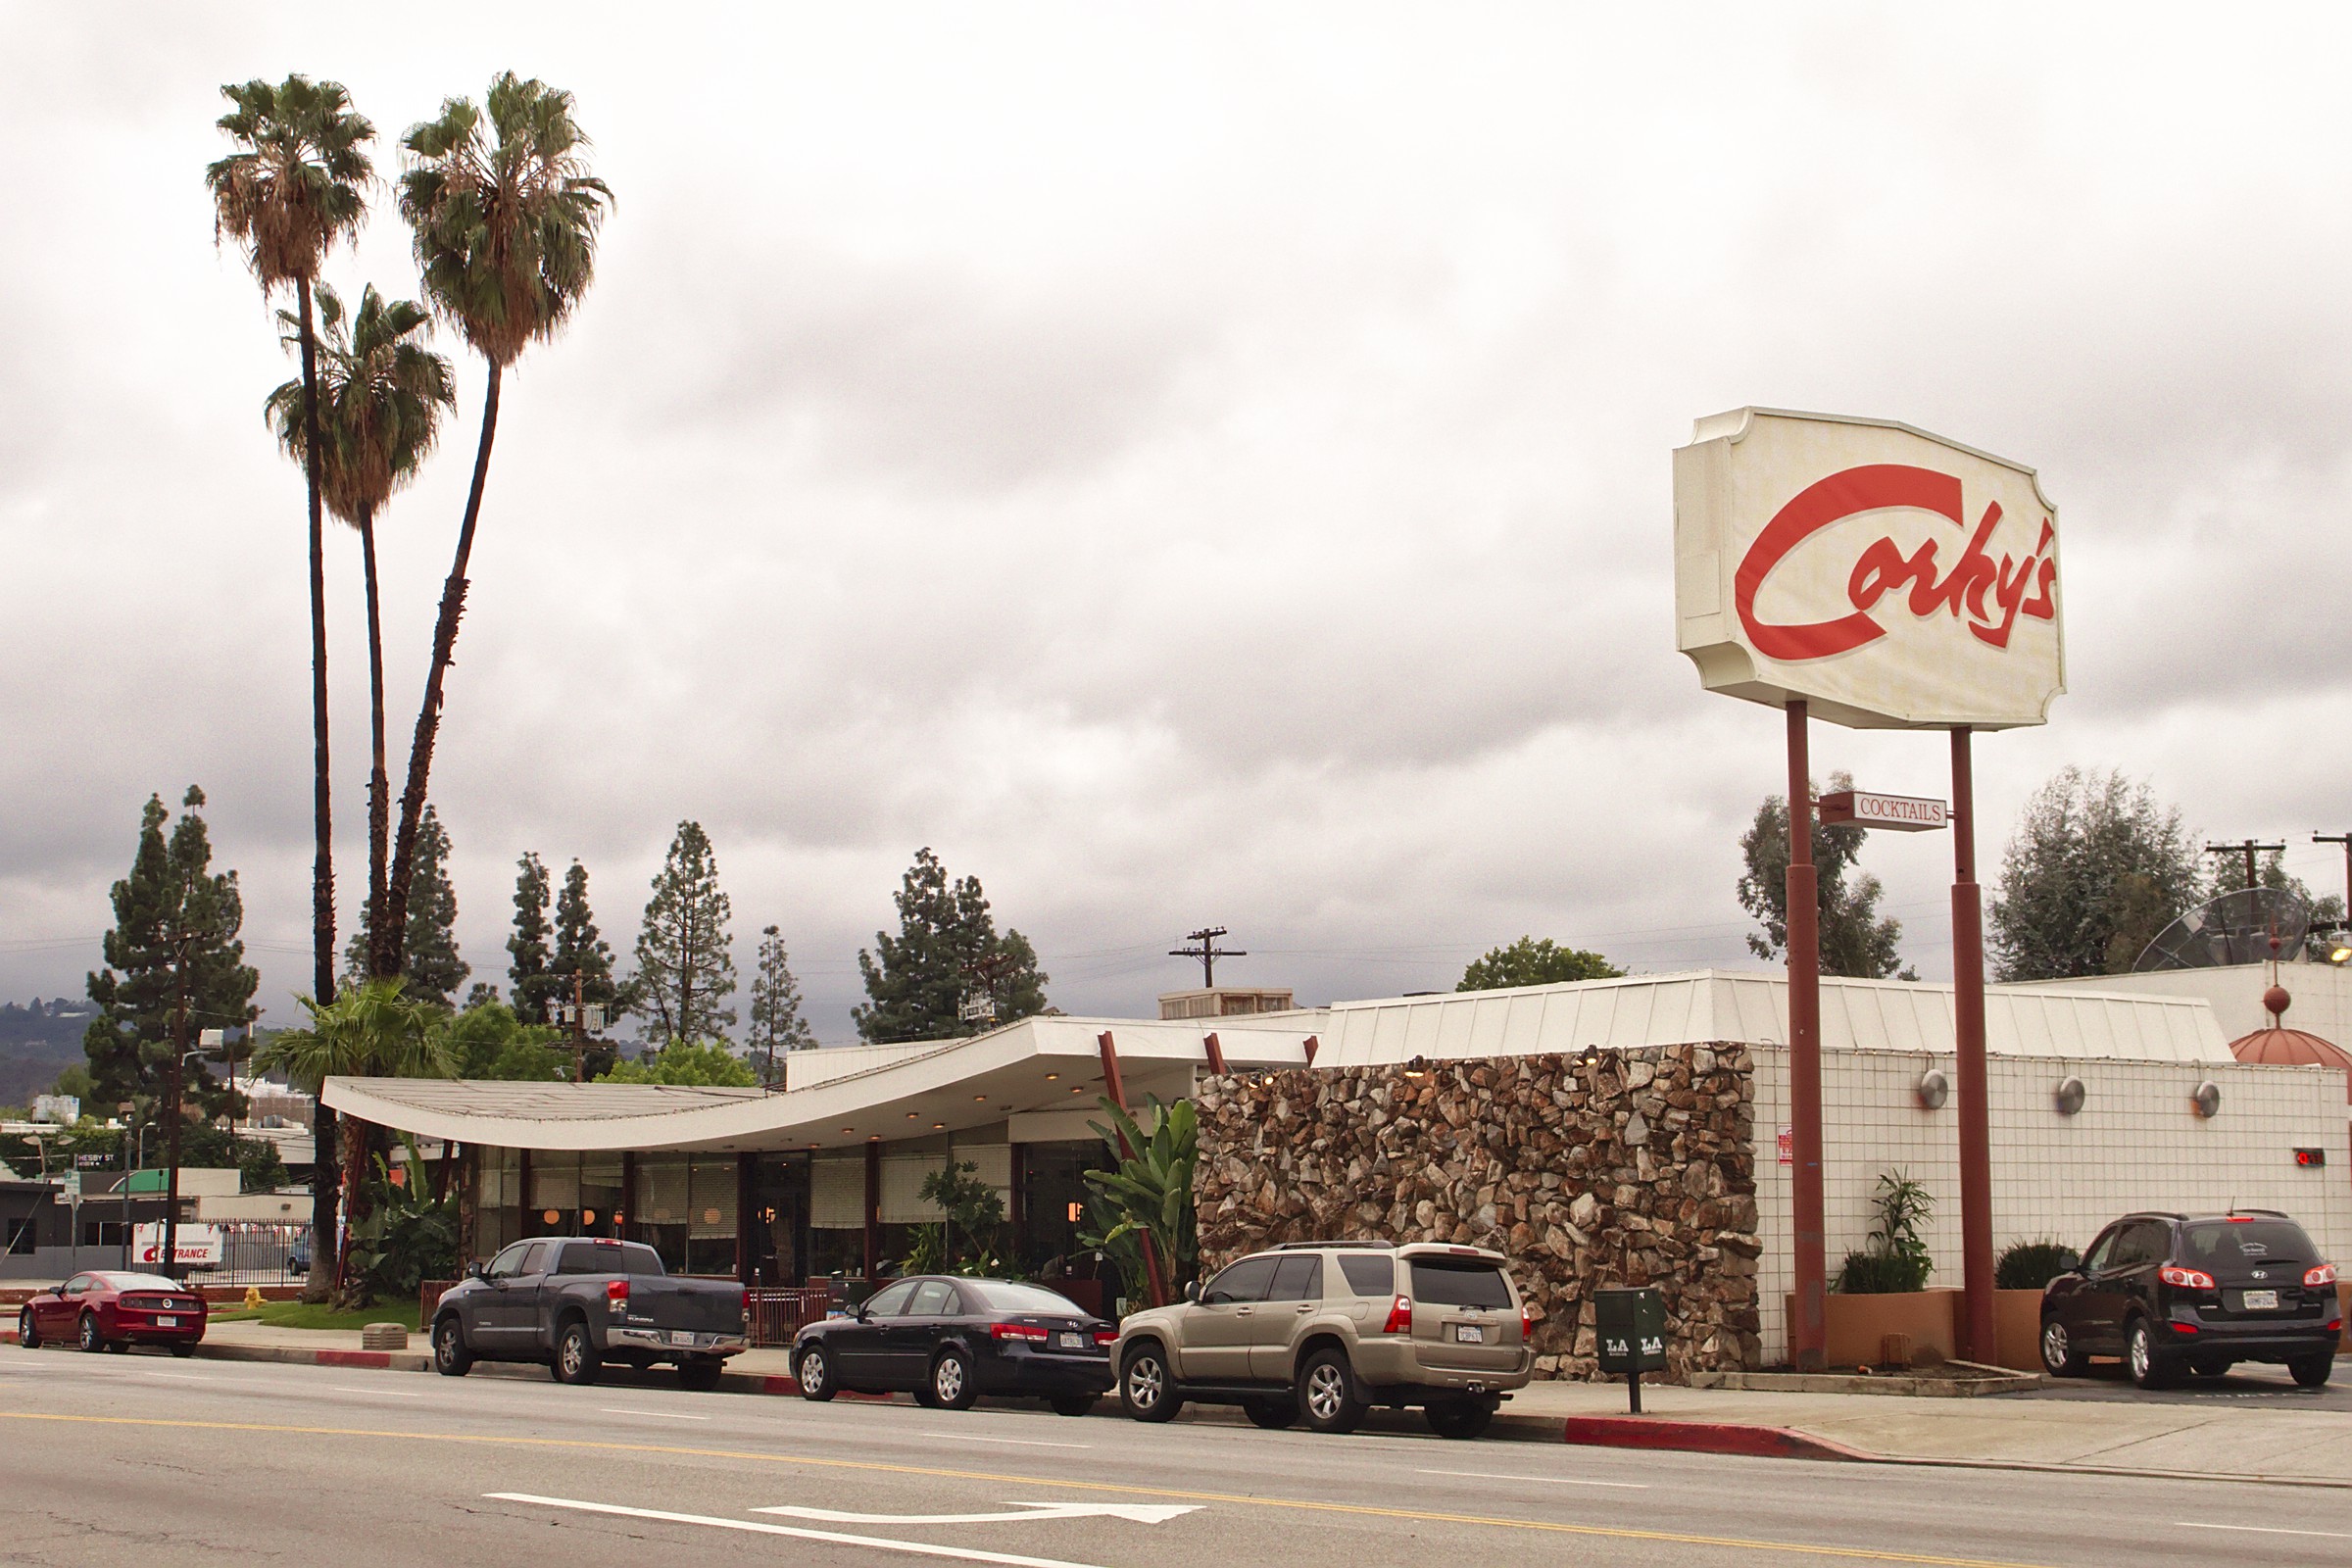 2014 photo of Corky's a low-slung Googie-style restaurant